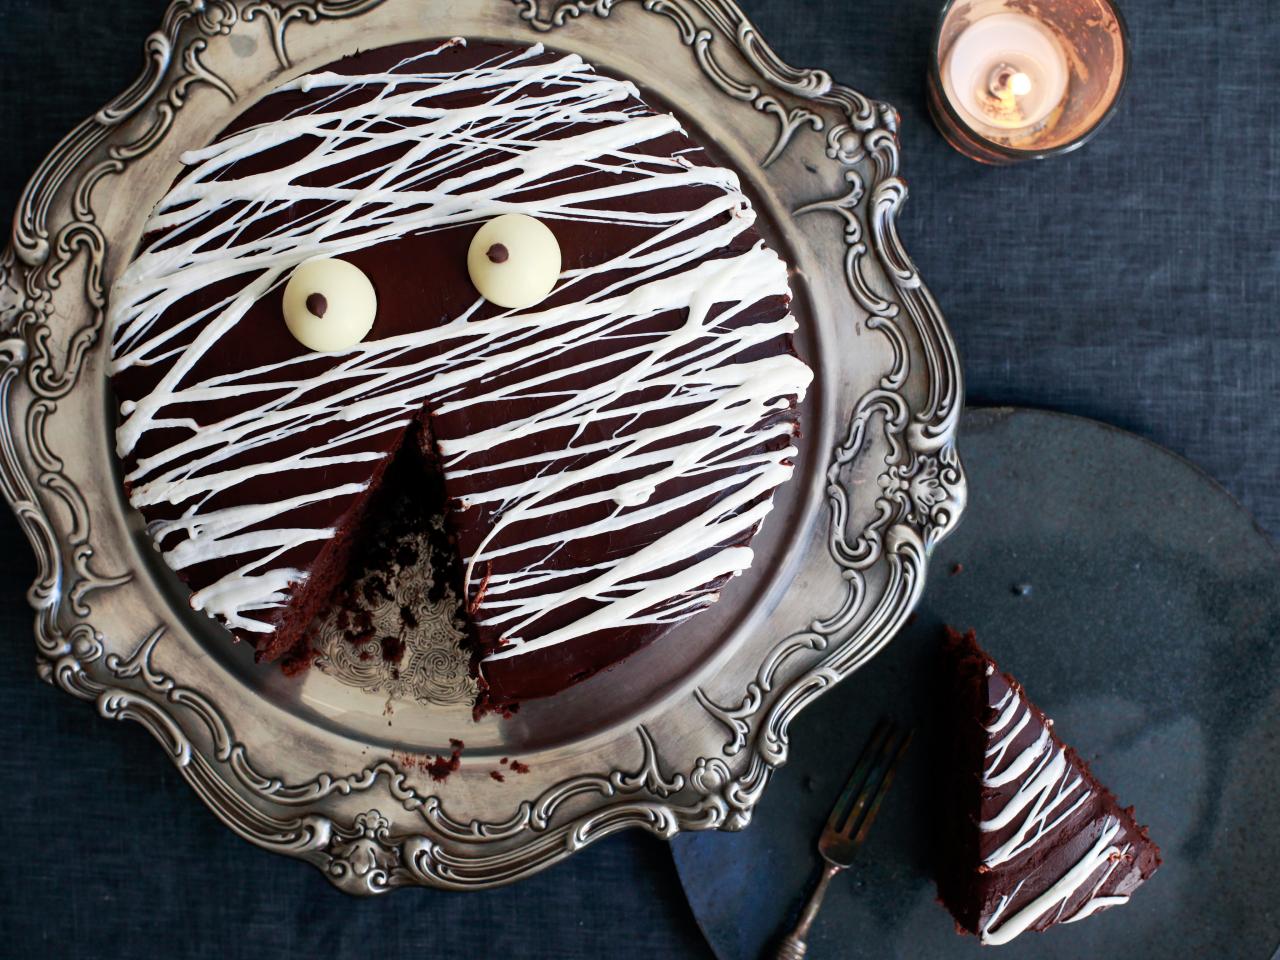 Halloween Party Food Ideas and Easy Recipes - Creepy Coffin Cakes - Robins  & Sons Chocolate